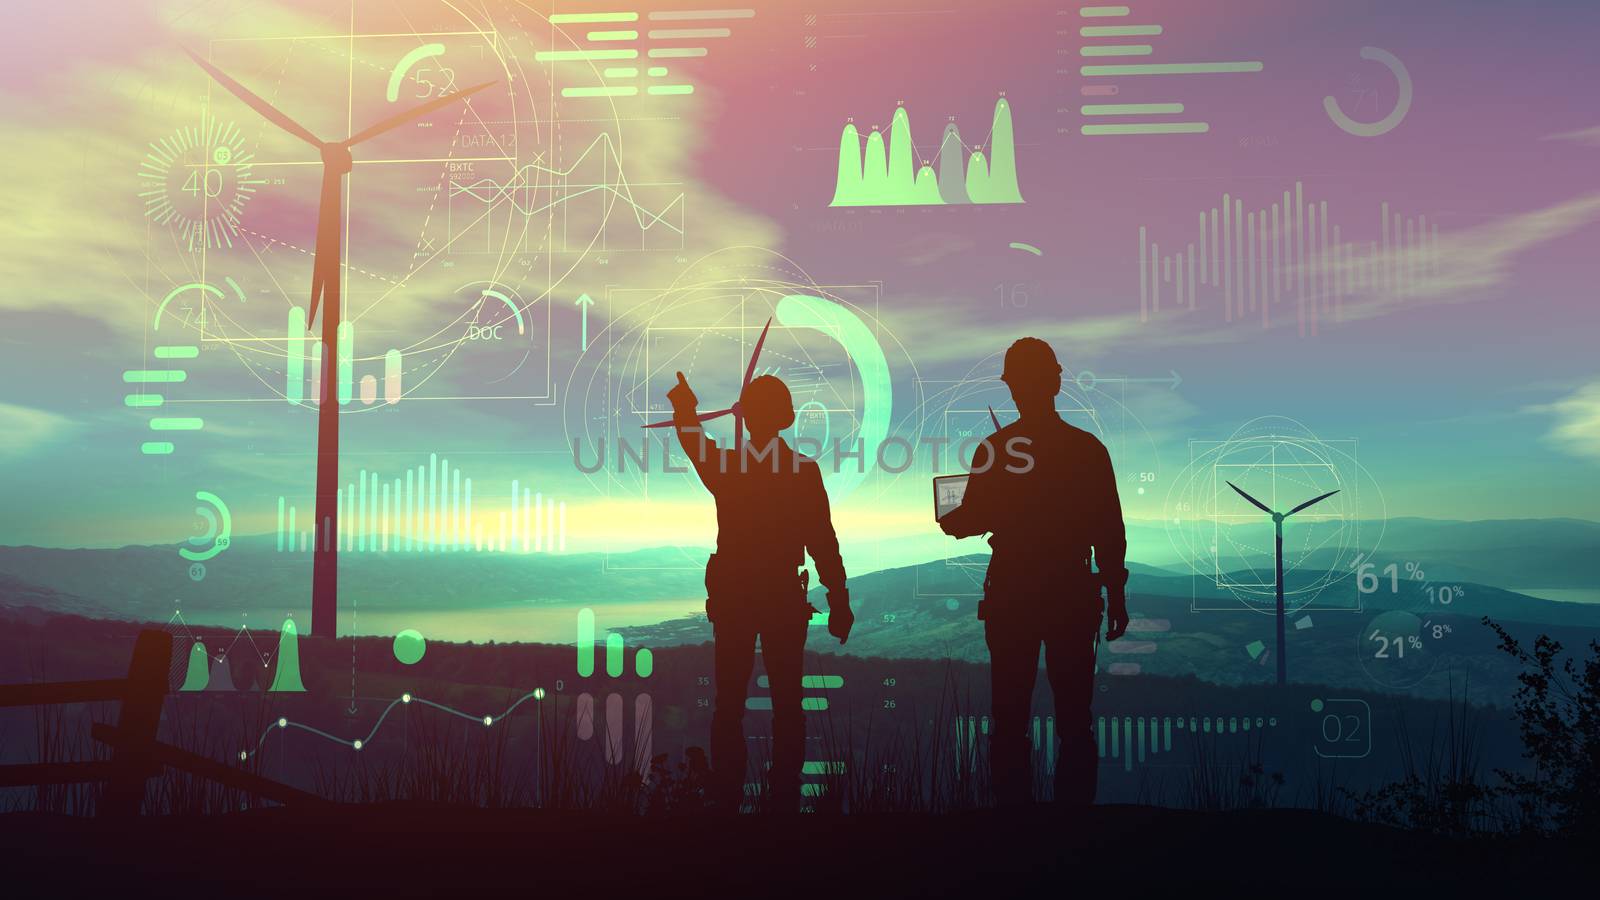 Silhouettes of engineers against the backdrop of sunset and wind farms, while infographics are visible in the virtual space.